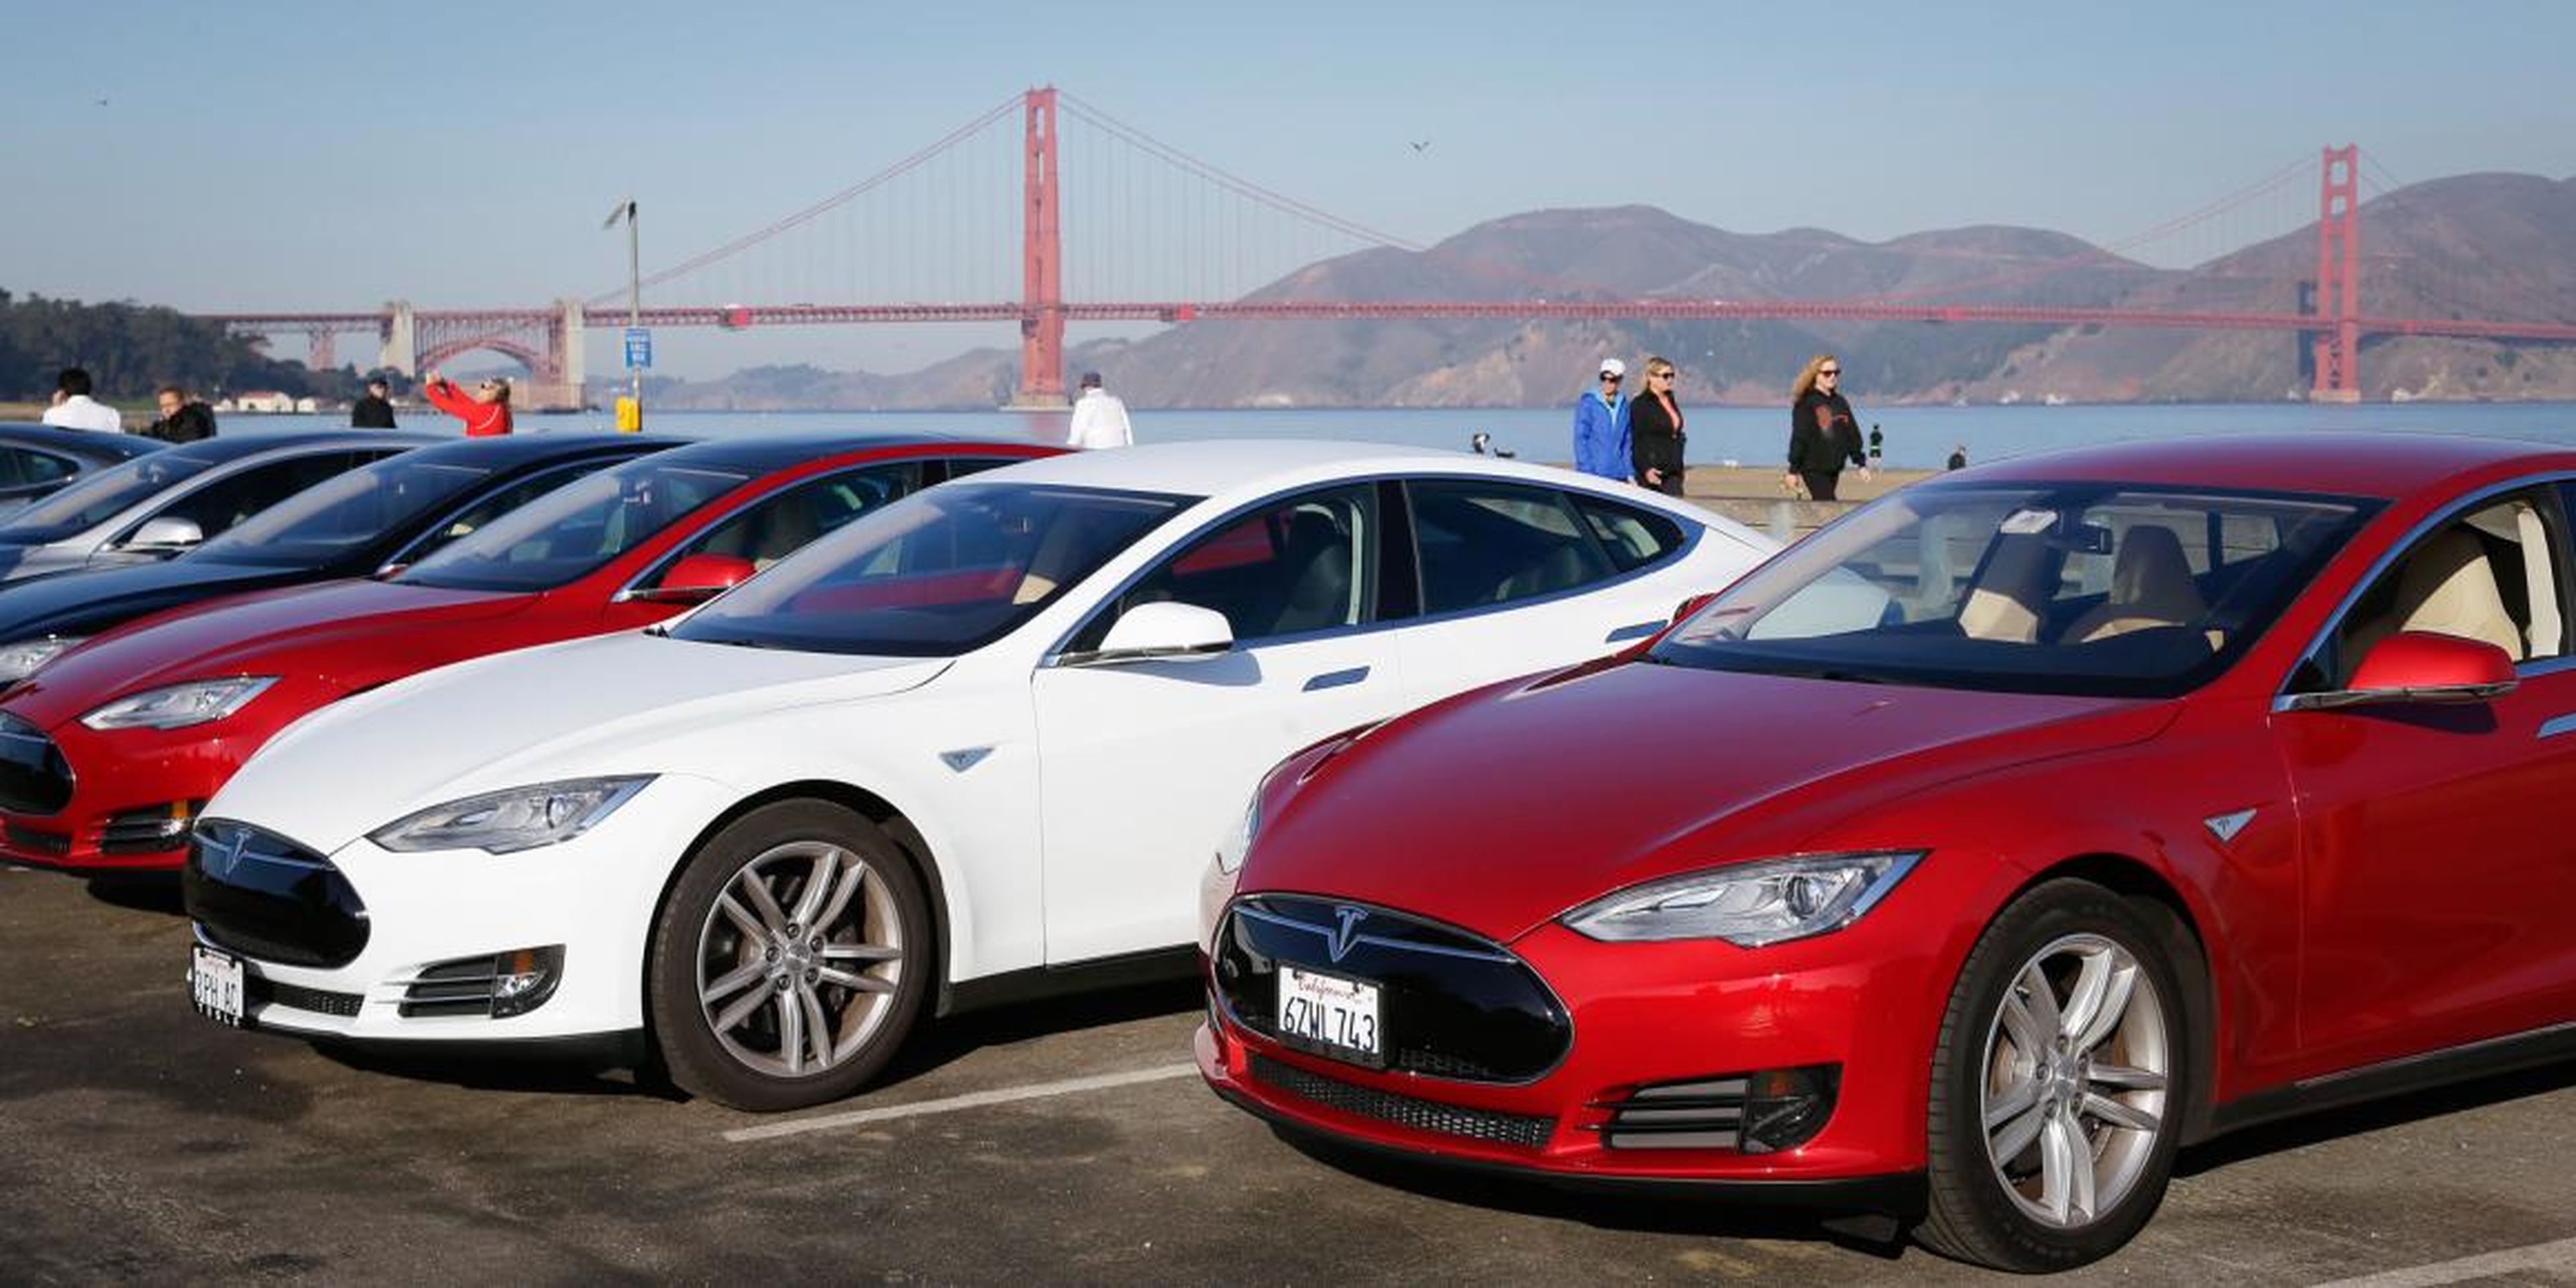 People in San Francisco are leasing their Teslas and supercars to strangers in order to afford owning a car in one of the most expensive cities in America